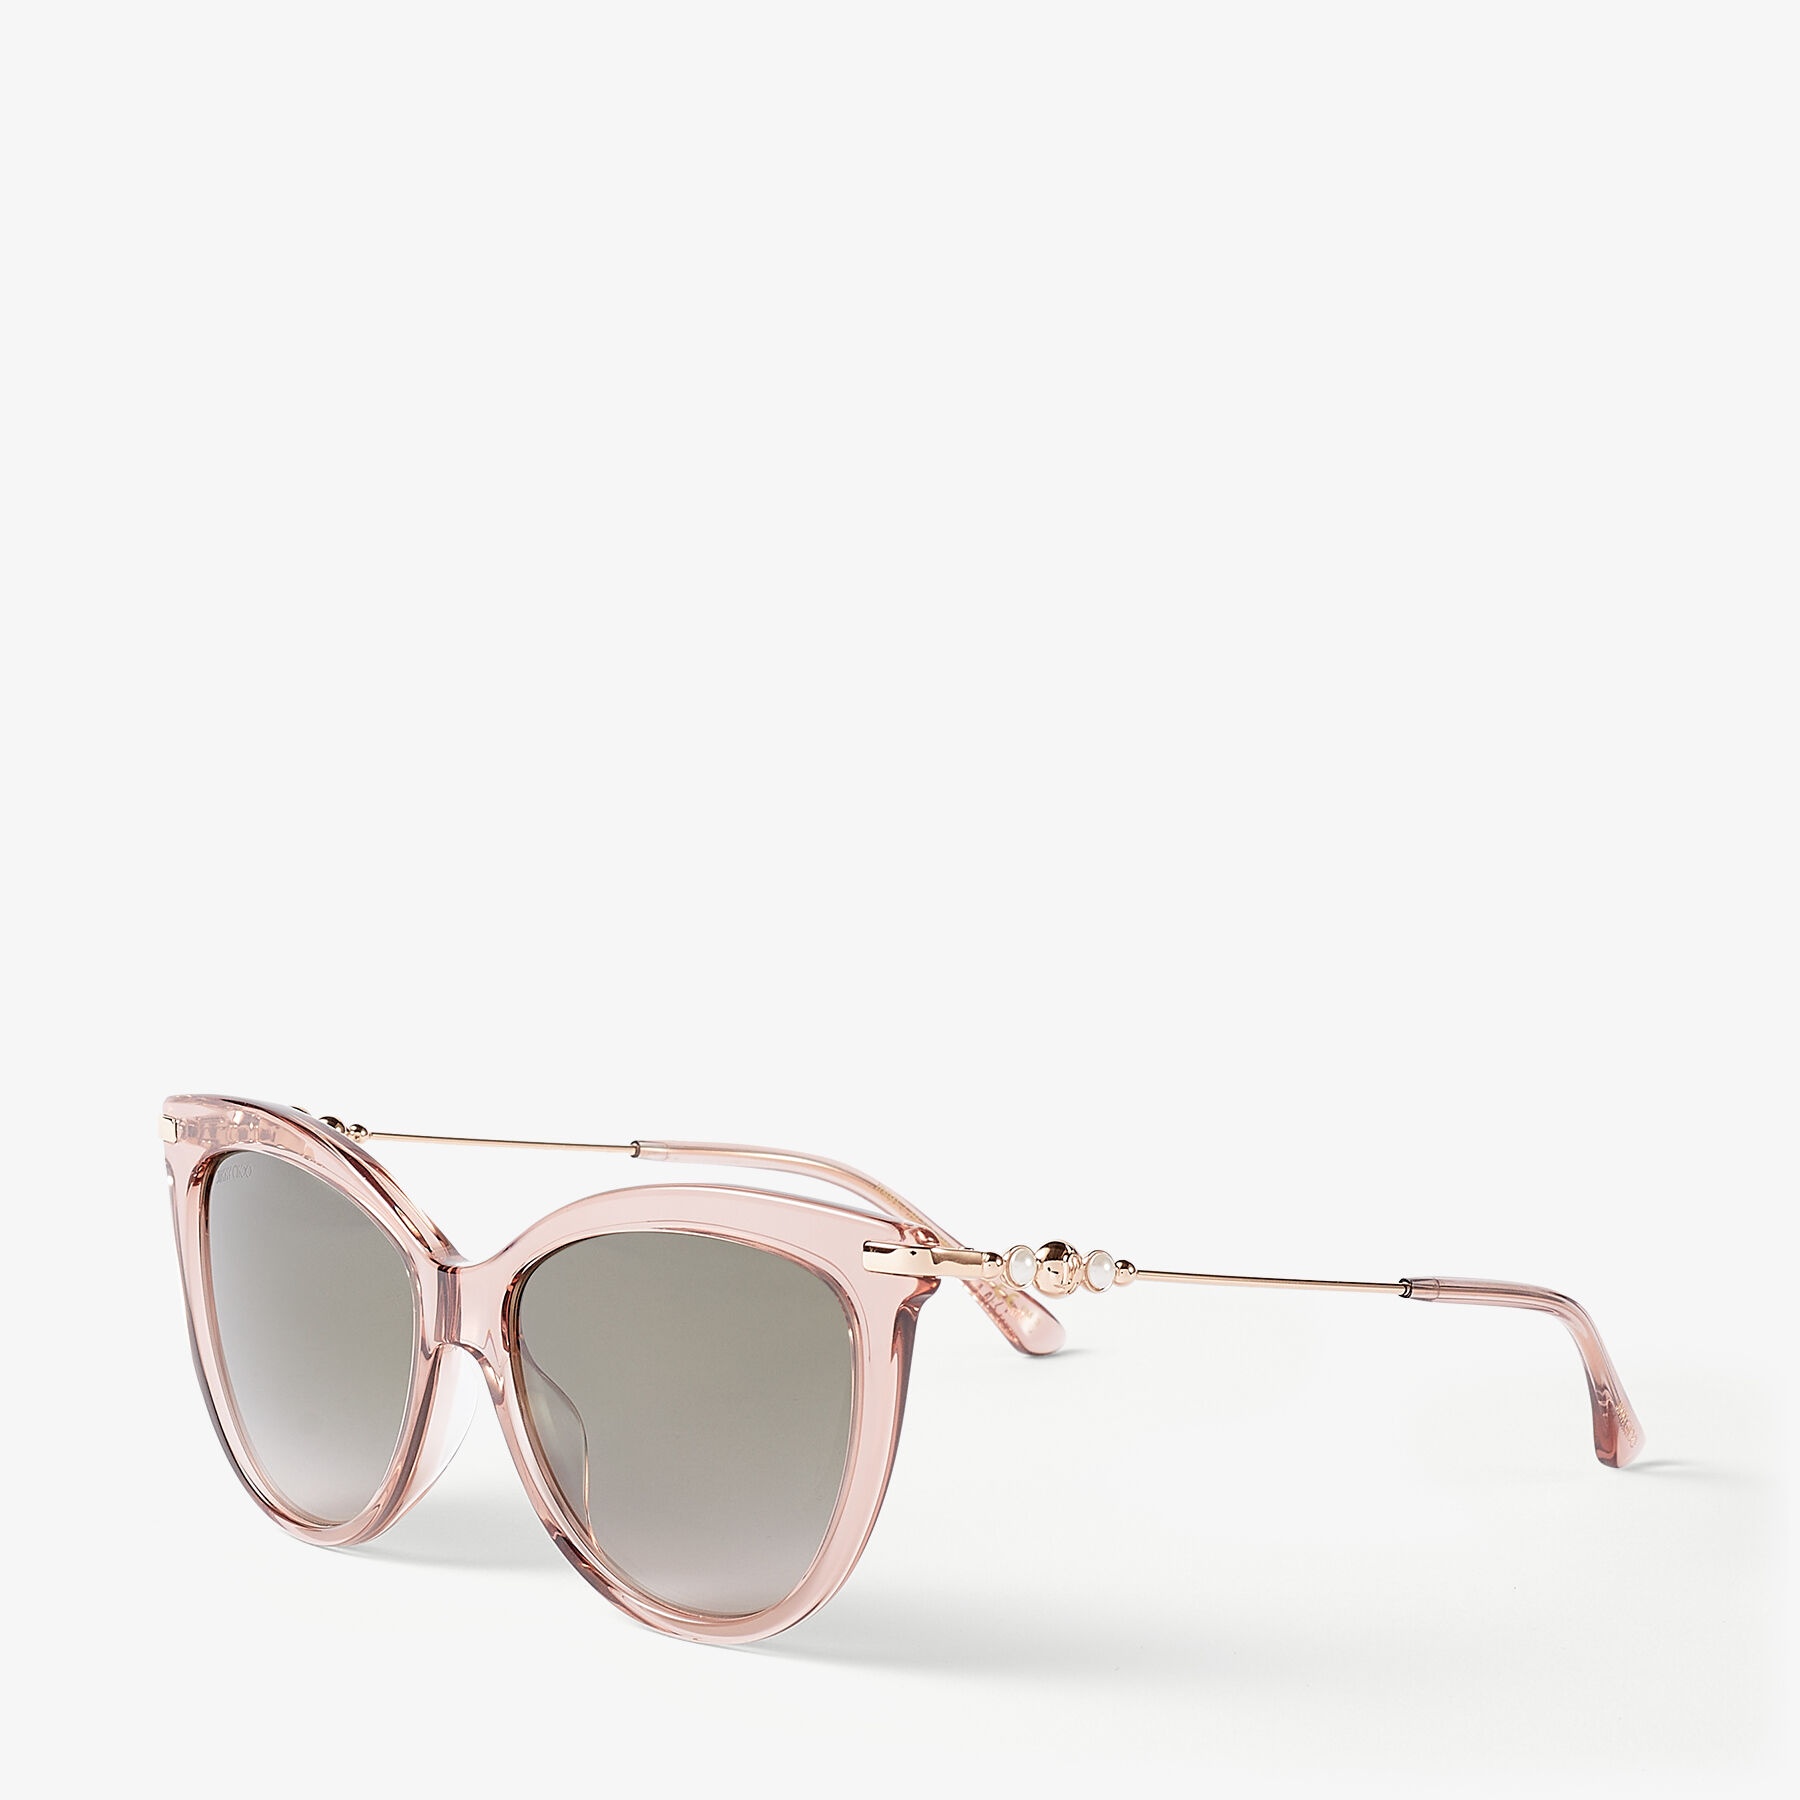 Tinsley/g/s 56
Nude and Copper Gold Cat Eye Sunglasses with Pearls - 3